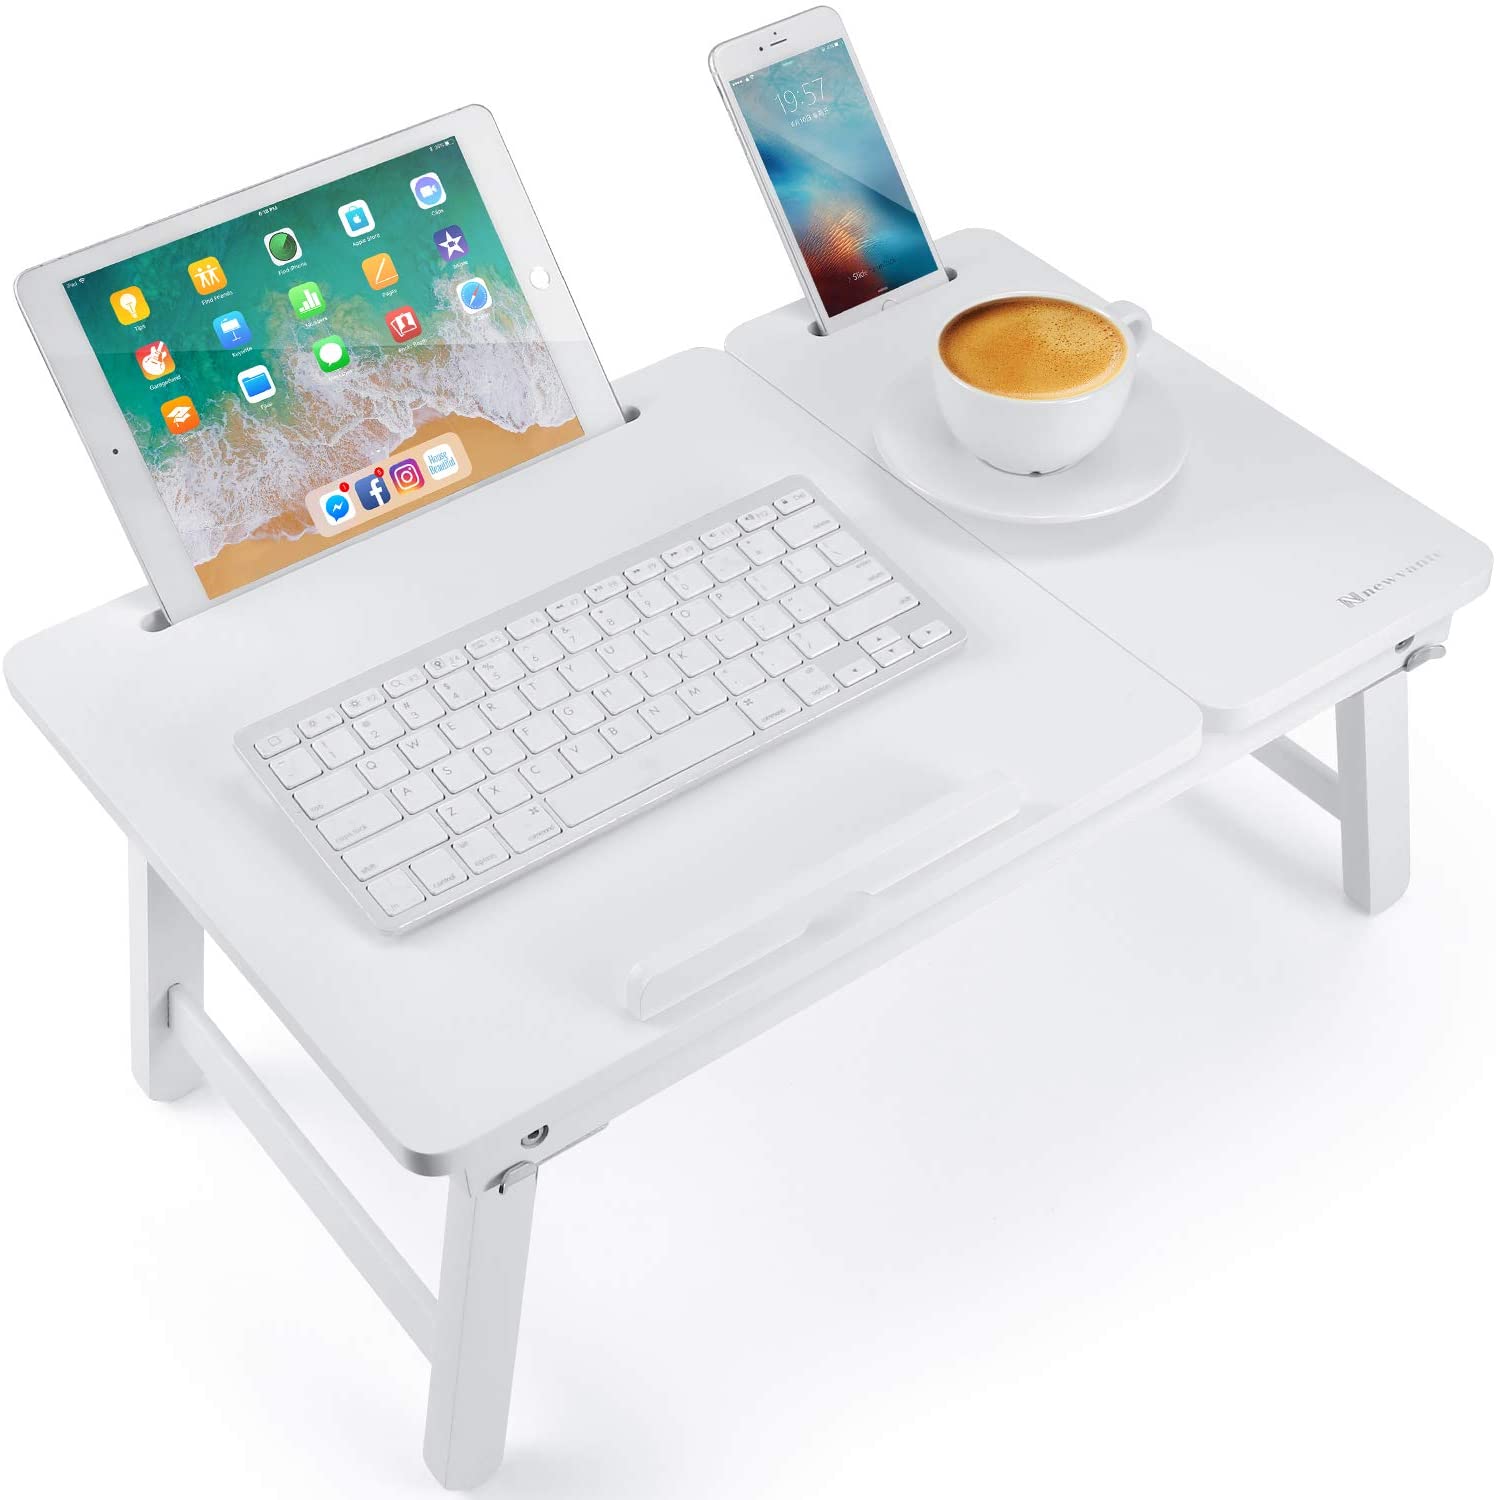 Foldable Laptop Desk Tray, Wooden Breakfast Serving Tray/Study Table with Drawer